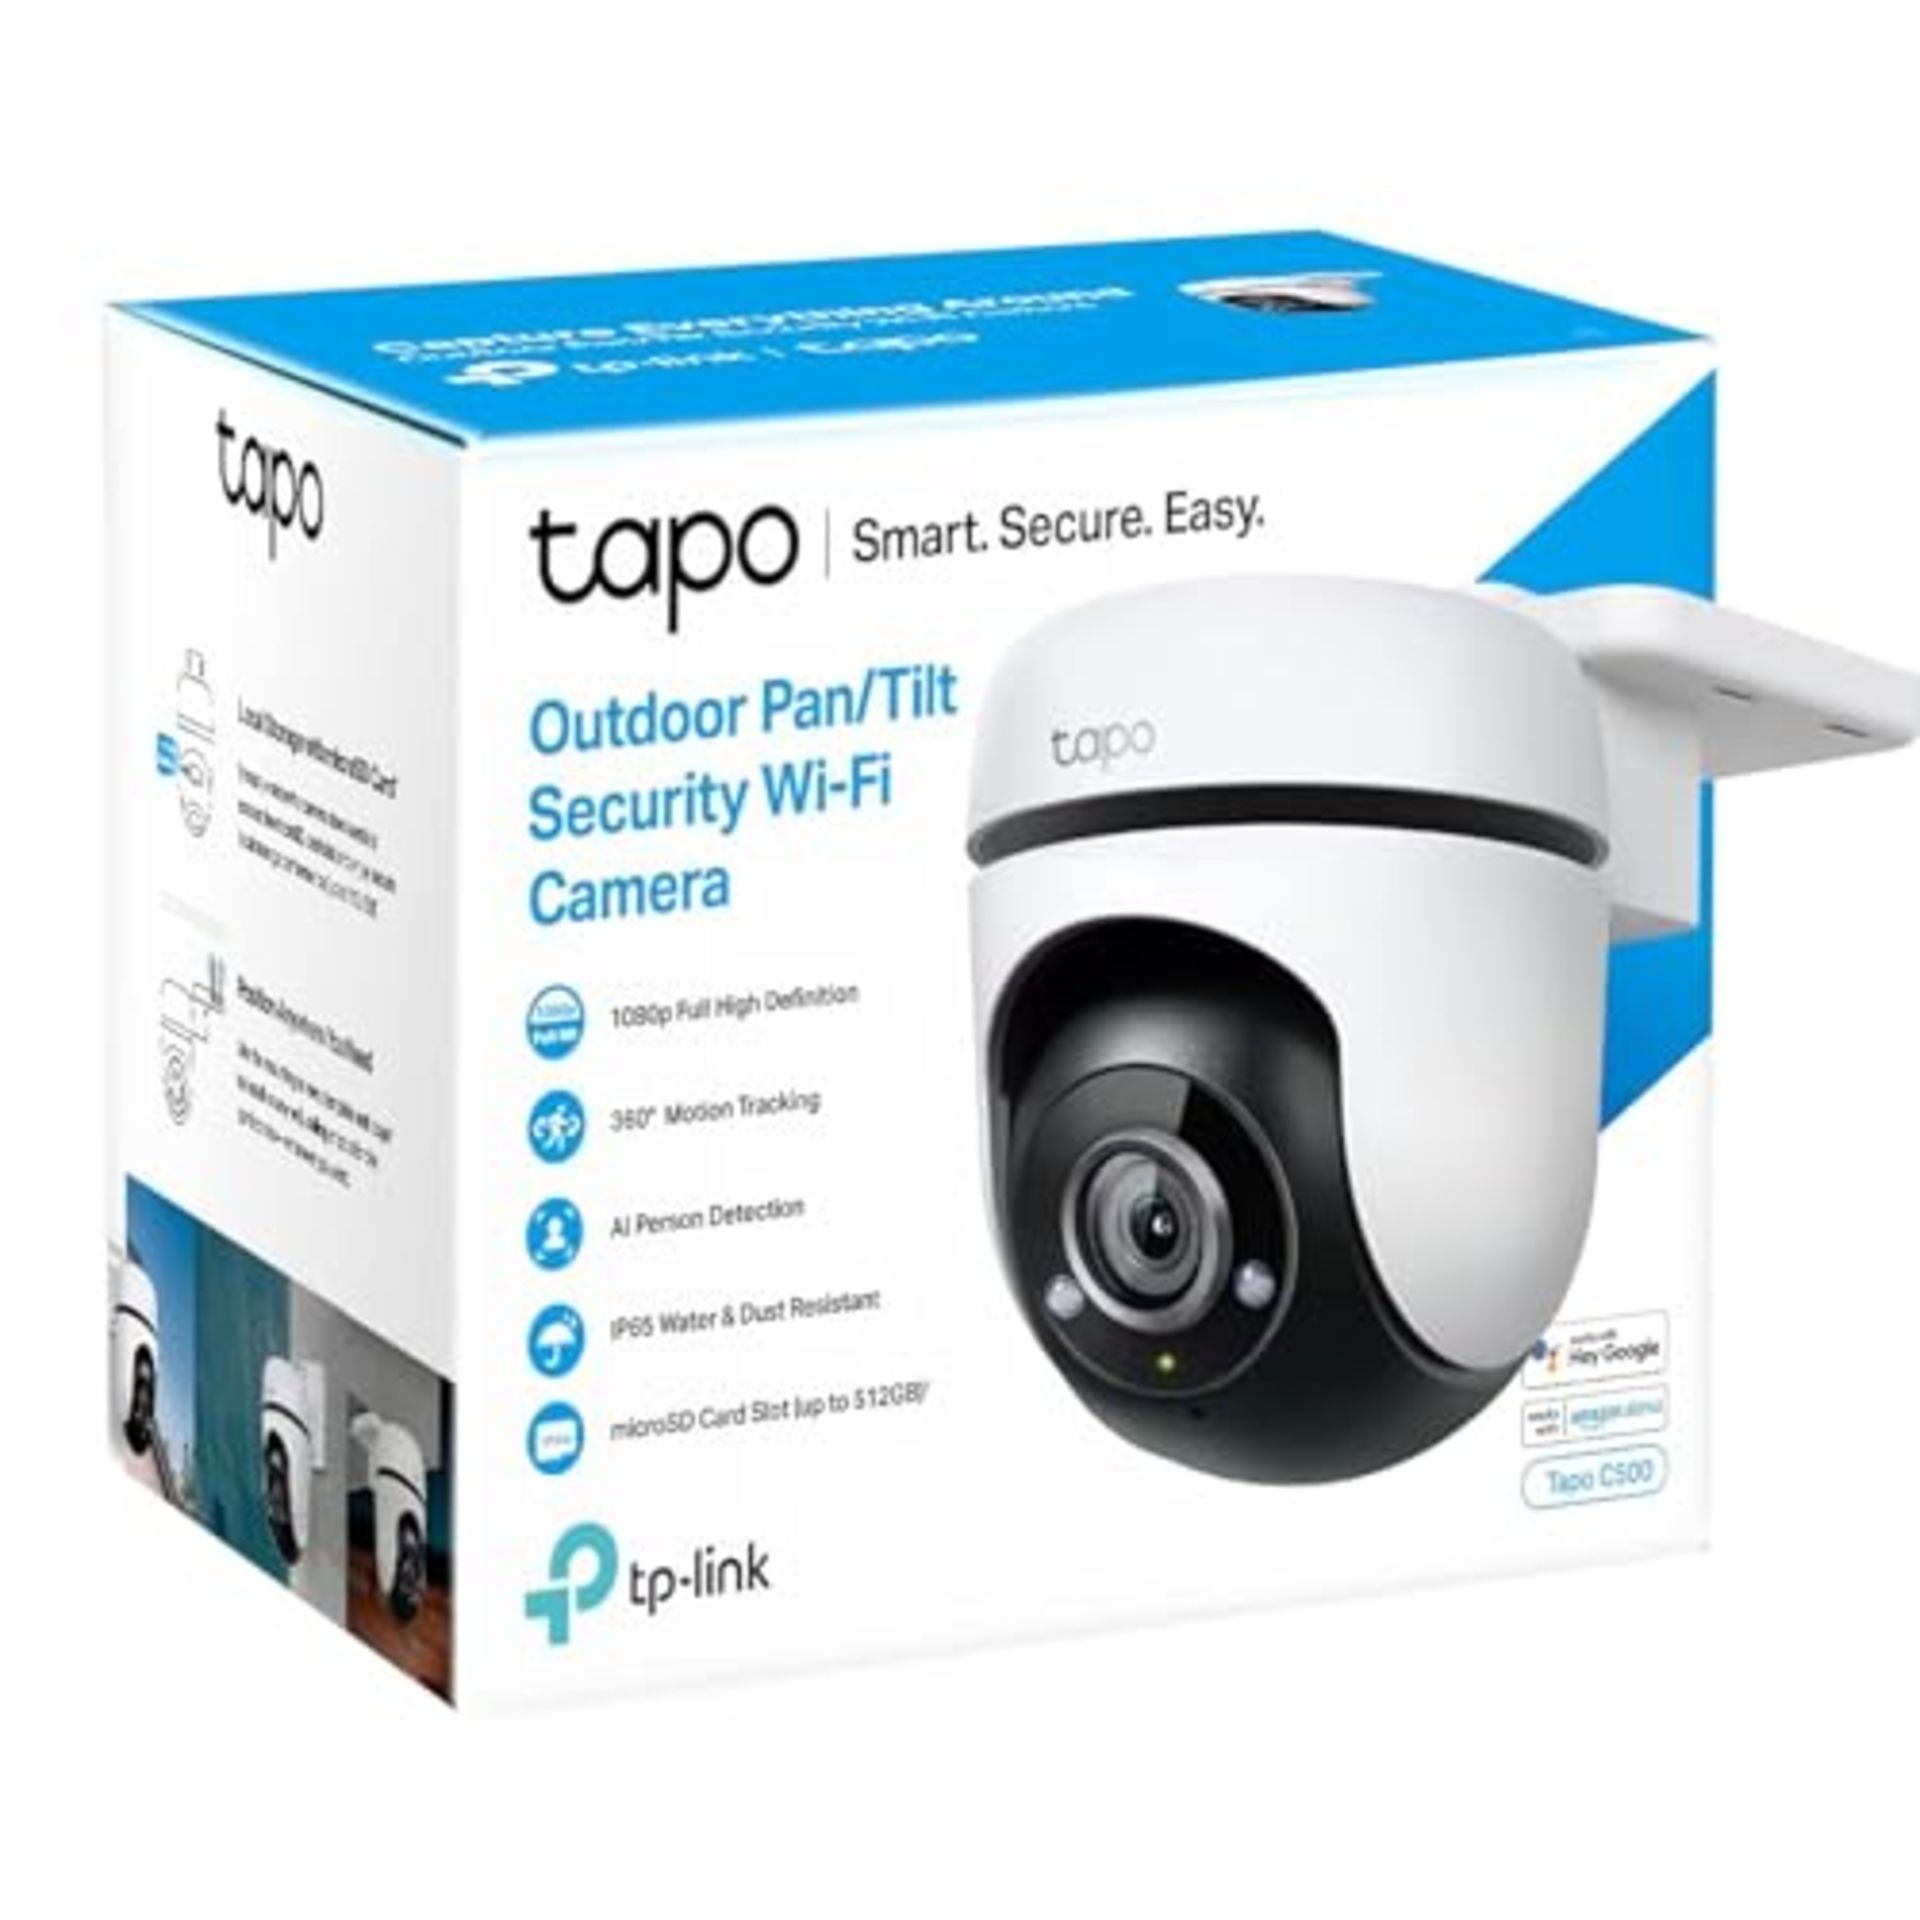 Tapo 1080p Full HD Outdoor Pan/Tilt Security Wi-Fi Camera, 360° Motion Detection, IP6